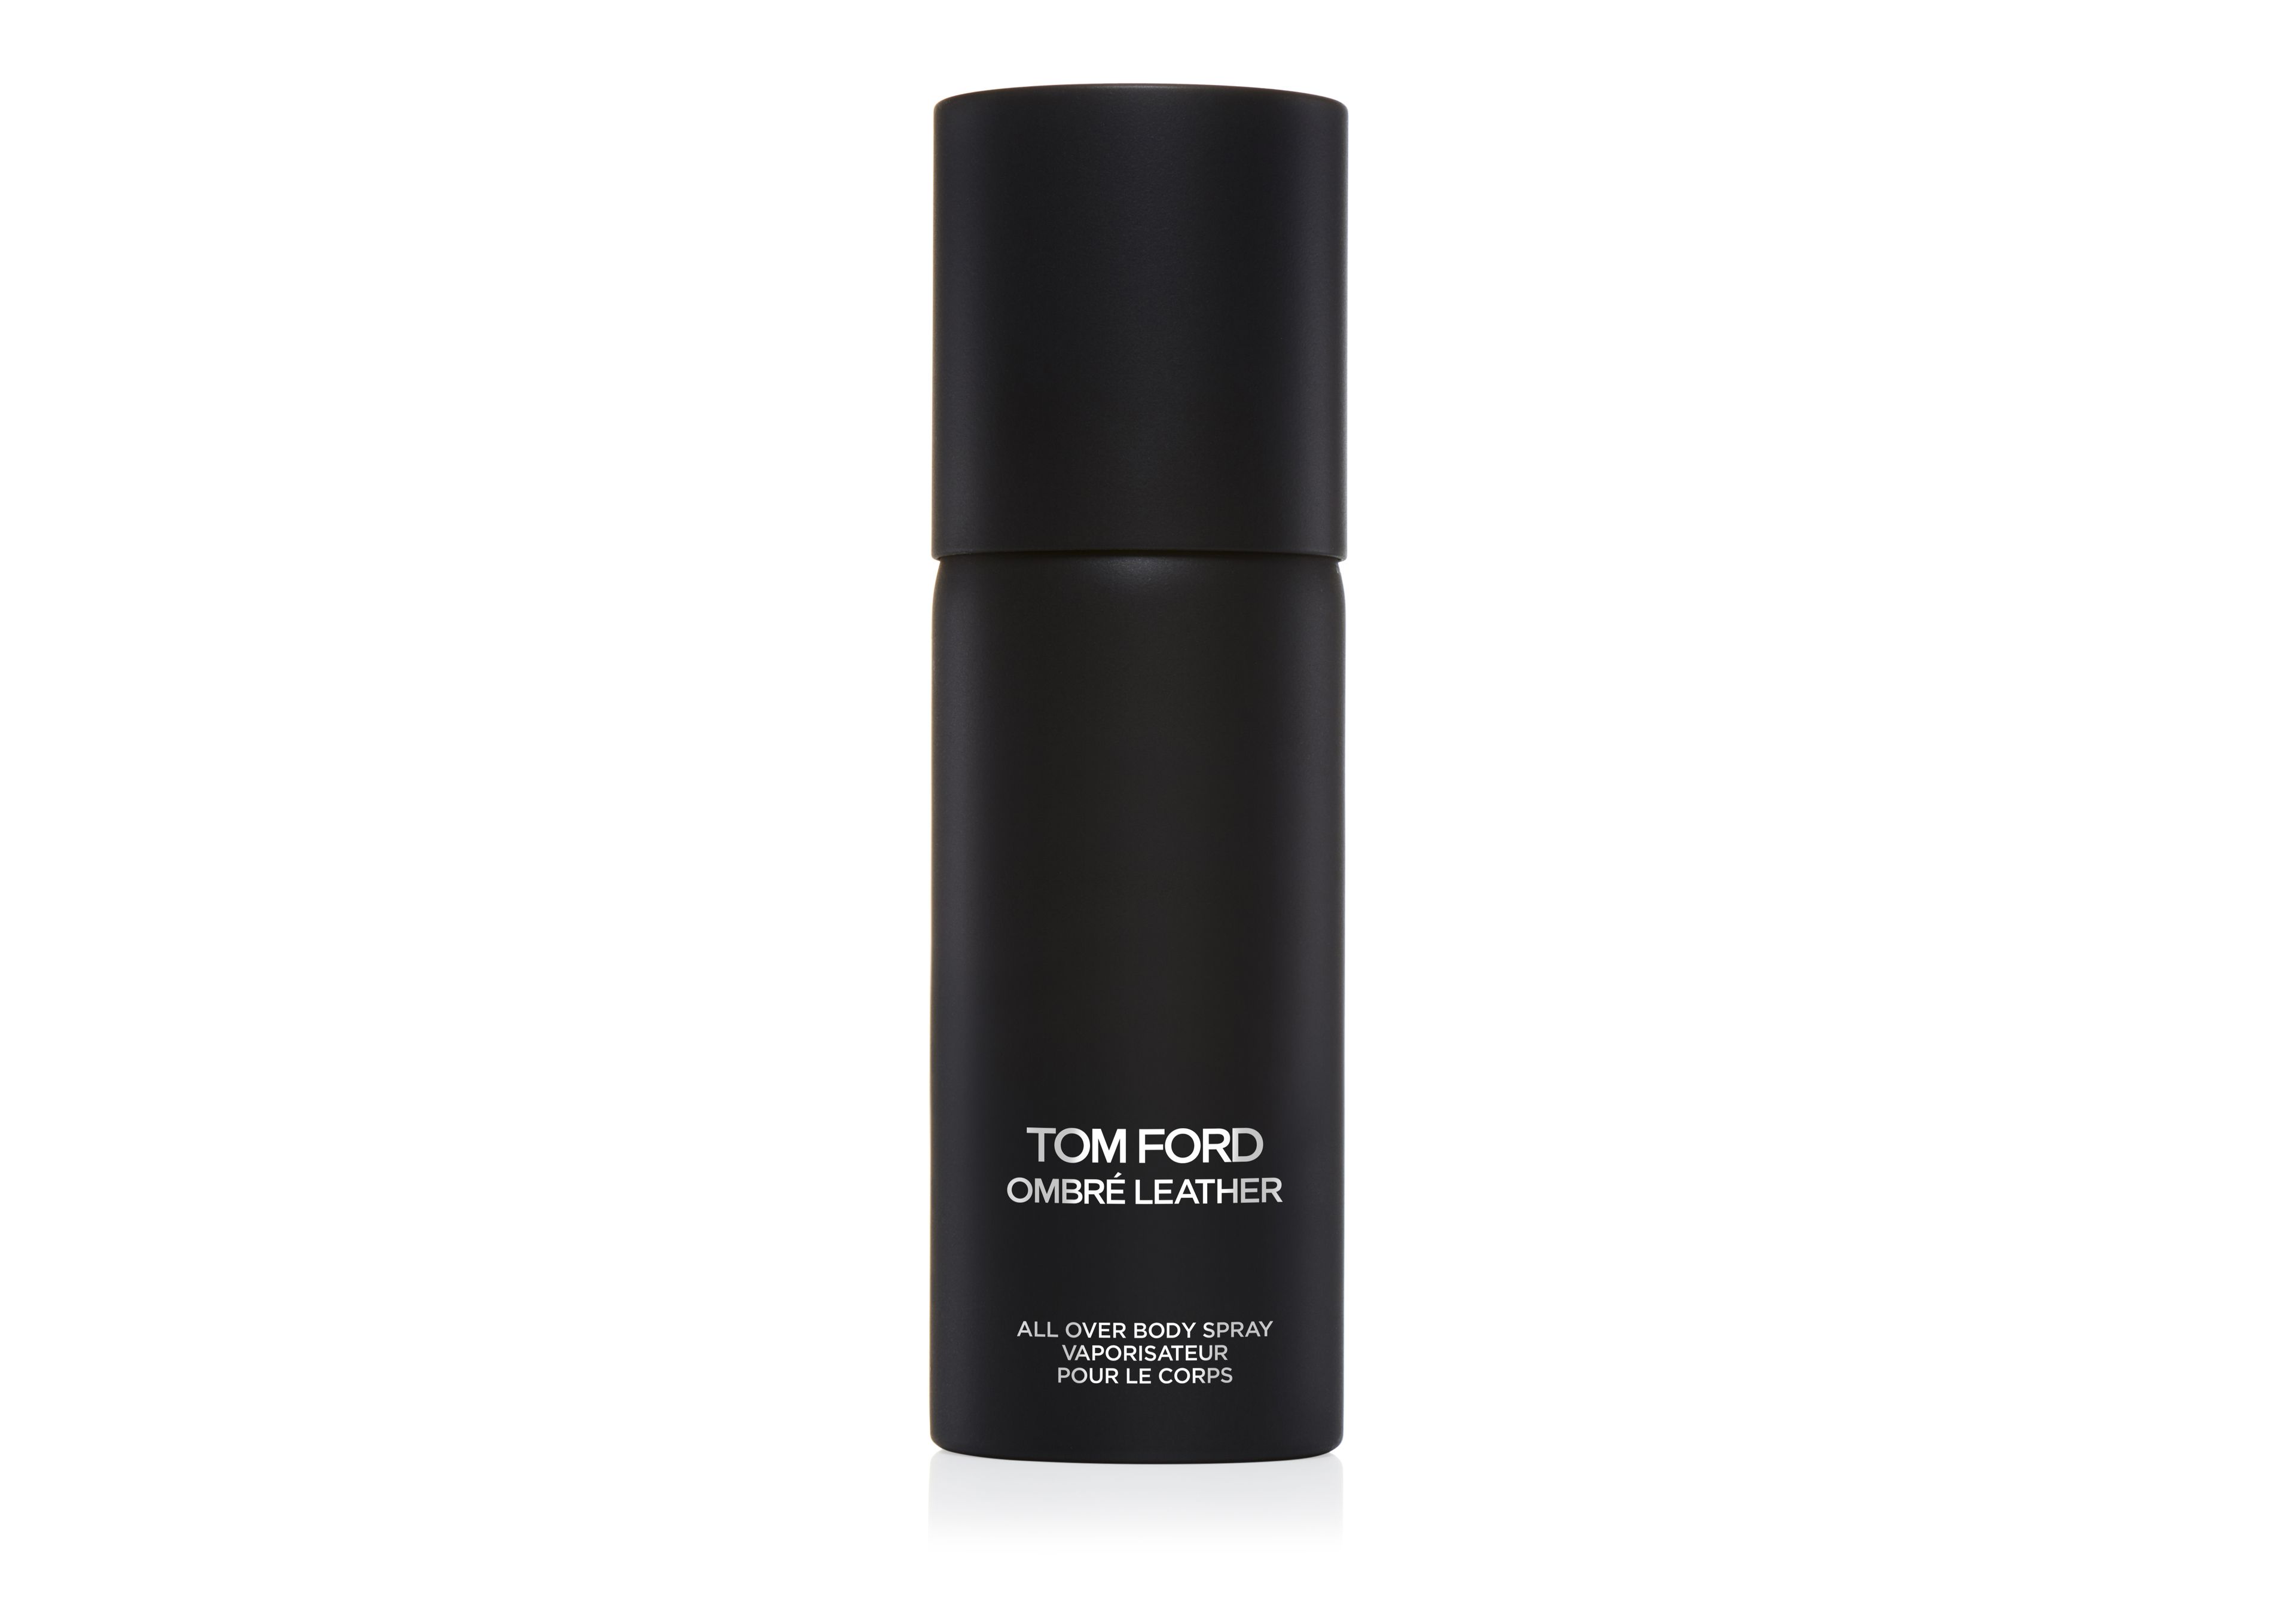 Tom Ford Ombre Leather 
all Over Body Spray 2